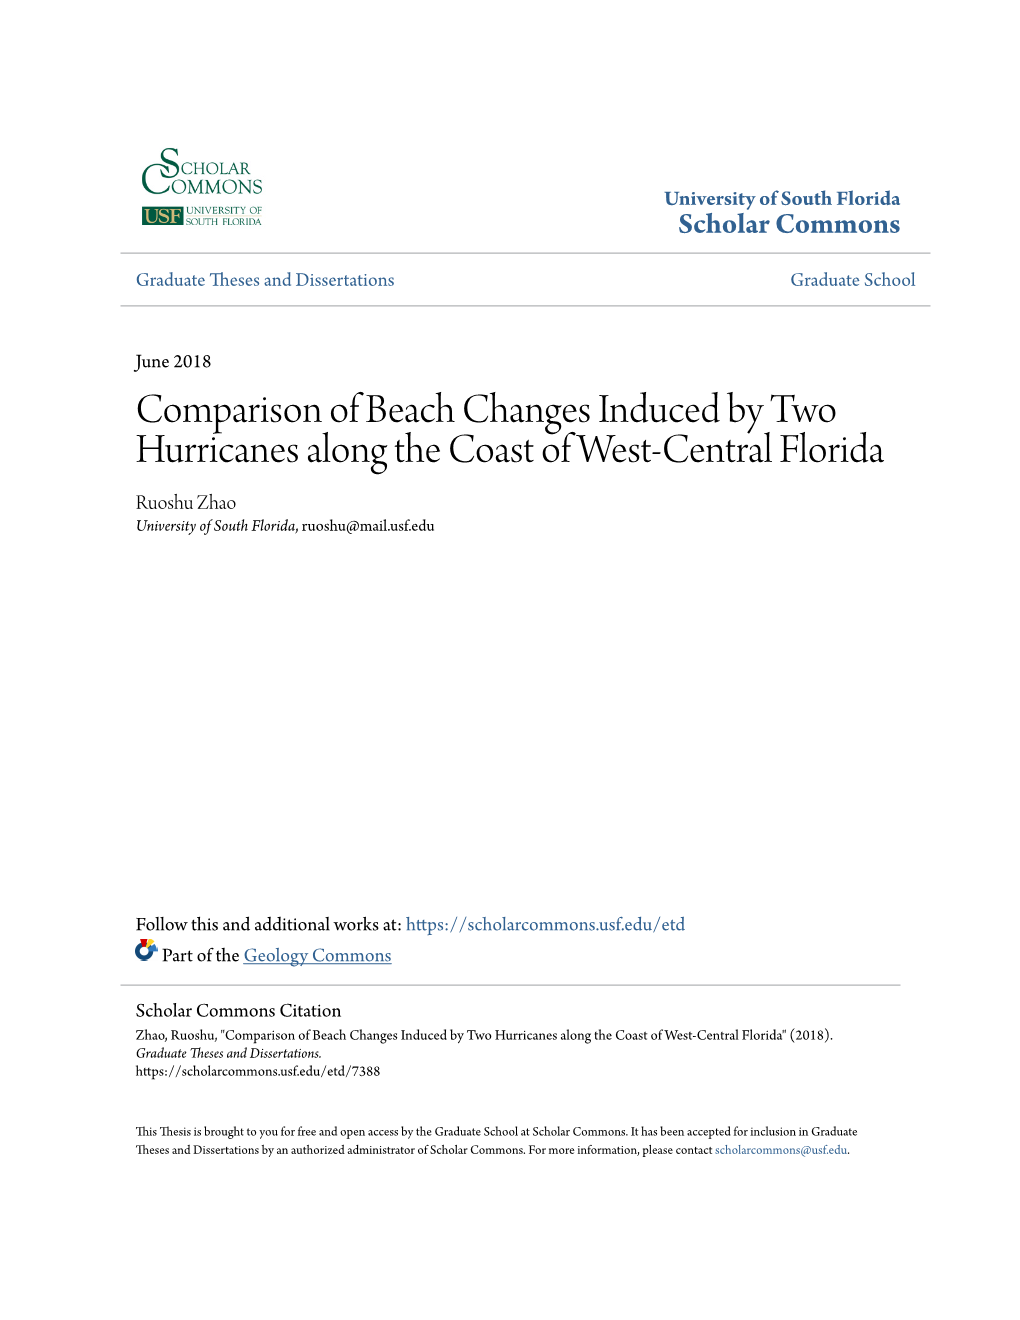 Comparison of Beach Changes Induced by Two Hurricanes Along the Coast of West-Central Florida Ruoshu Zhao University of South Florida, Ruoshu@Mail.Usf.Edu